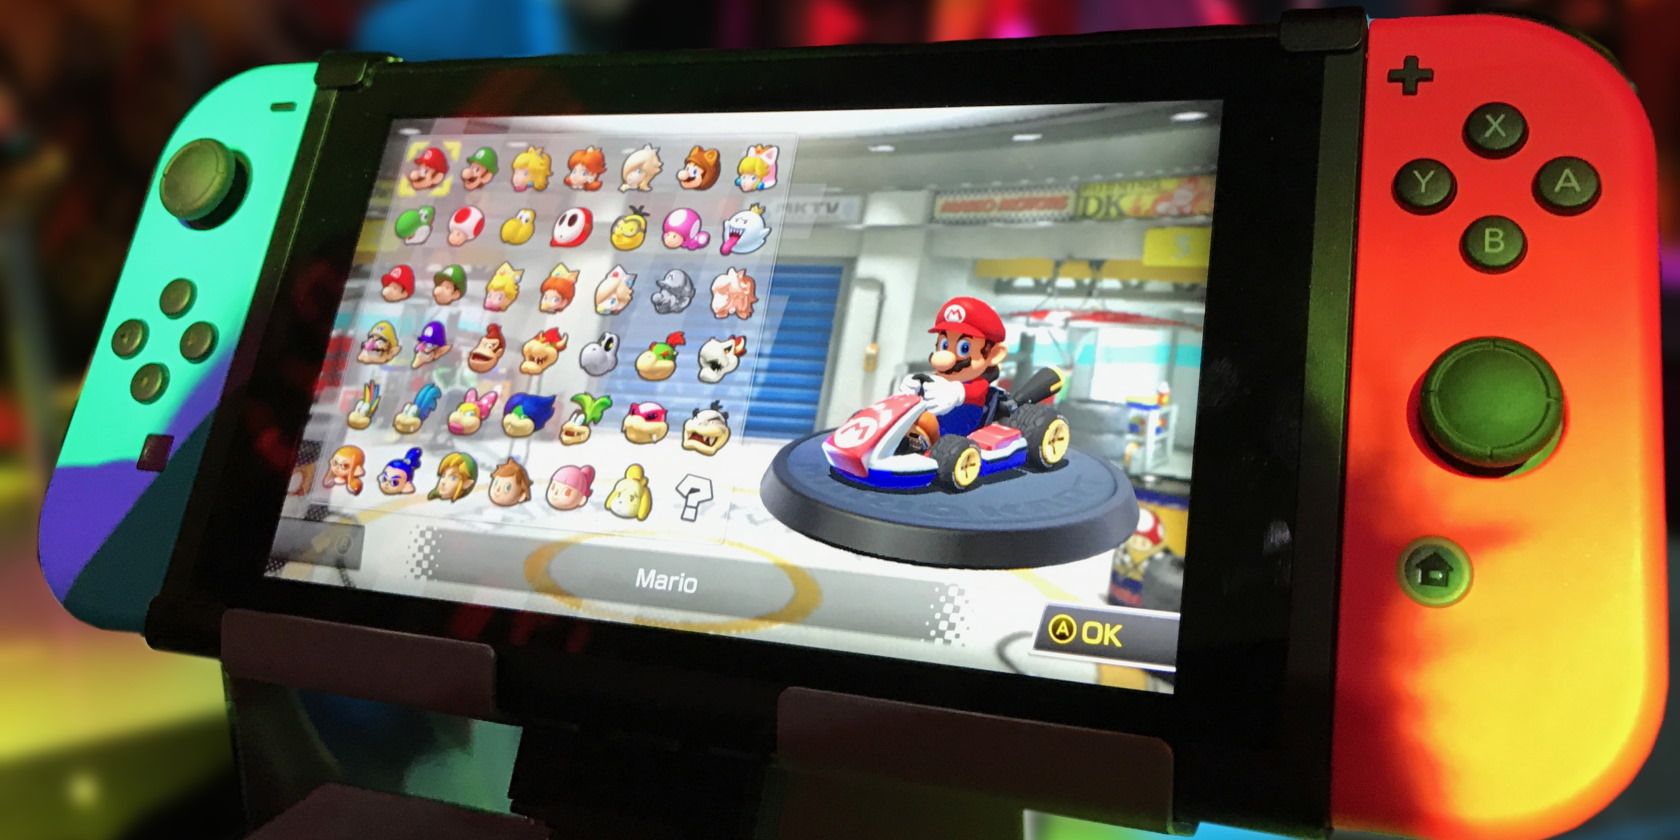 Yes, You Can Connect Nintendo a TV Without the - Here's How